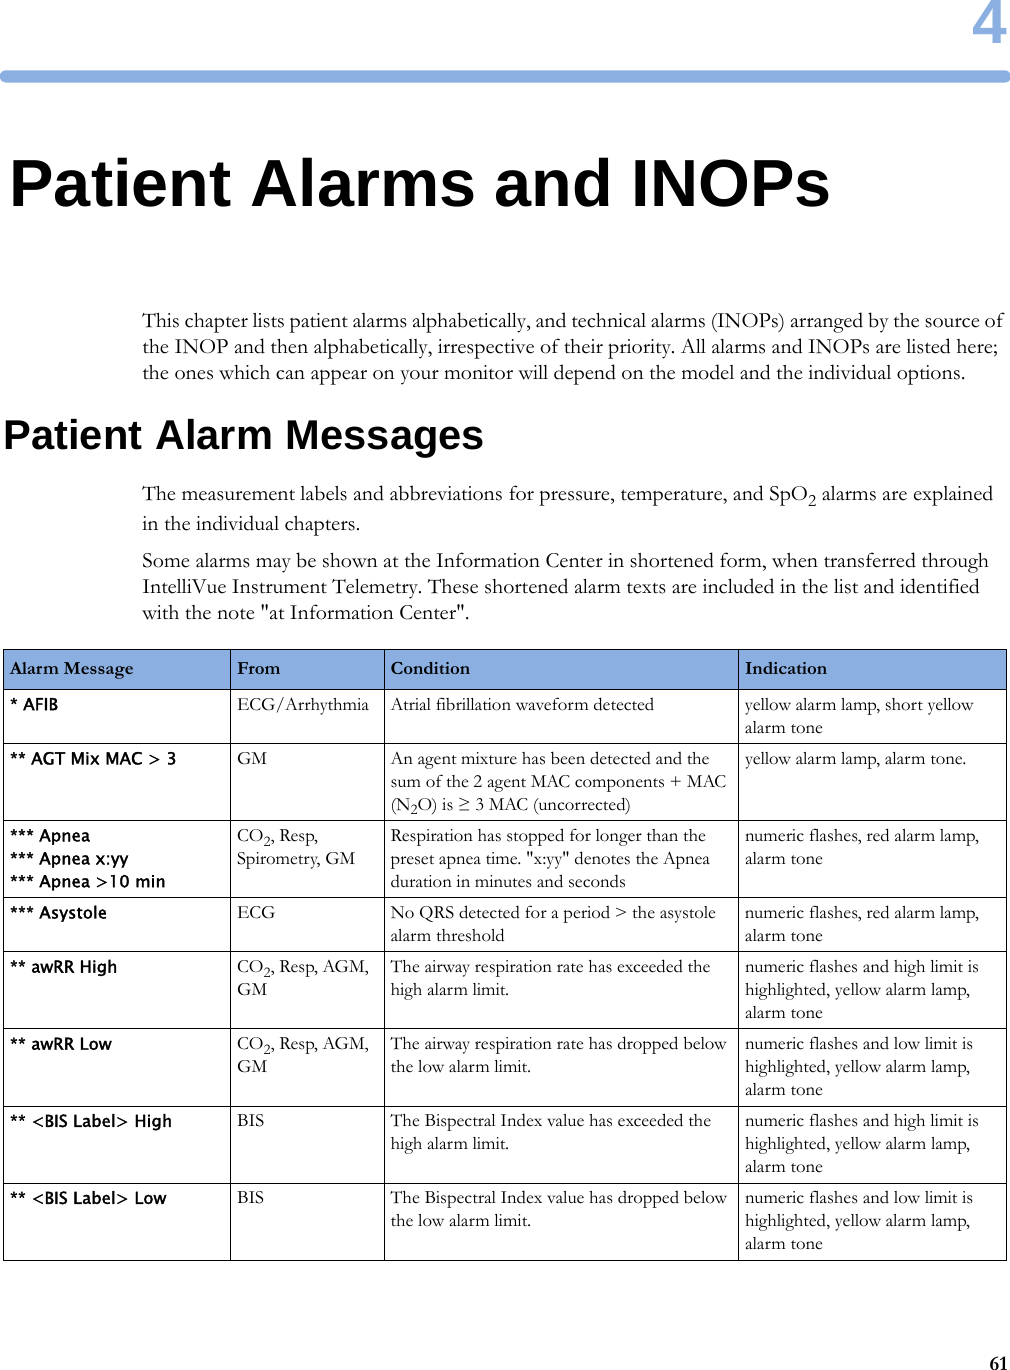 4614Patient Alarms and INOPsThis chapter lists patient alarms alphabetically, and technical alarms (INOPs) arranged by the source of the INOP and then alphabetically, irrespective of their priority. All alarms and INOPs are listed here; the ones which can appear on your monitor will depend on the model and the individual options.Patient Alarm MessagesThe measurement labels and abbreviations for pressure, temperature, and SpO2 alarms are explained in the individual chapters.Some alarms may be shown at the Information Center in shortened form, when transferred through IntelliVue Instrument Telemetry. These shortened alarm texts are included in the list and identified with the note &quot;at Information Center&quot;.Alarm Message From Condition Indication* AFIB ECG/Arrhythmia Atrial fibrillation waveform detected yellow alarm lamp, short yellow alarm tone** AGT Mix MAC &gt; 3 GM An agent mixture has been detected and the sum of the 2 agent MAC components + MAC (N2O) is ≥ 3 MAC (uncorrected)yellow alarm lamp, alarm tone.*** Apnea*** Apnea x:yy*** Apnea &gt;10 minCO2, Resp, Spirometry, GMRespiration has stopped for longer than the preset apnea time. &quot;x:yy&quot; denotes the Apnea duration in minutes and secondsnumeric flashes, red alarm lamp, alarm tone*** Asystole ECG No QRS detected for a period &gt; the asystole alarm thresholdnumeric flashes, red alarm lamp, alarm tone** awRR High CO2, Resp, AGM, GMThe airway respiration rate has exceeded the high alarm limit.numeric flashes and high limit is highlighted, yellow alarm lamp, alarm tone** awRR Low CO2, Resp, AGM, GMThe airway respiration rate has dropped below the low alarm limit.numeric flashes and low limit is highlighted, yellow alarm lamp, alarm tone** &lt;BIS Label&gt; High BIS The Bispectral Index value has exceeded the high alarm limit.numeric flashes and high limit is highlighted, yellow alarm lamp, alarm tone** &lt;BIS Label&gt; Low BIS The Bispectral Index value has dropped below the low alarm limit.numeric flashes and low limit is highlighted, yellow alarm lamp, alarm tone